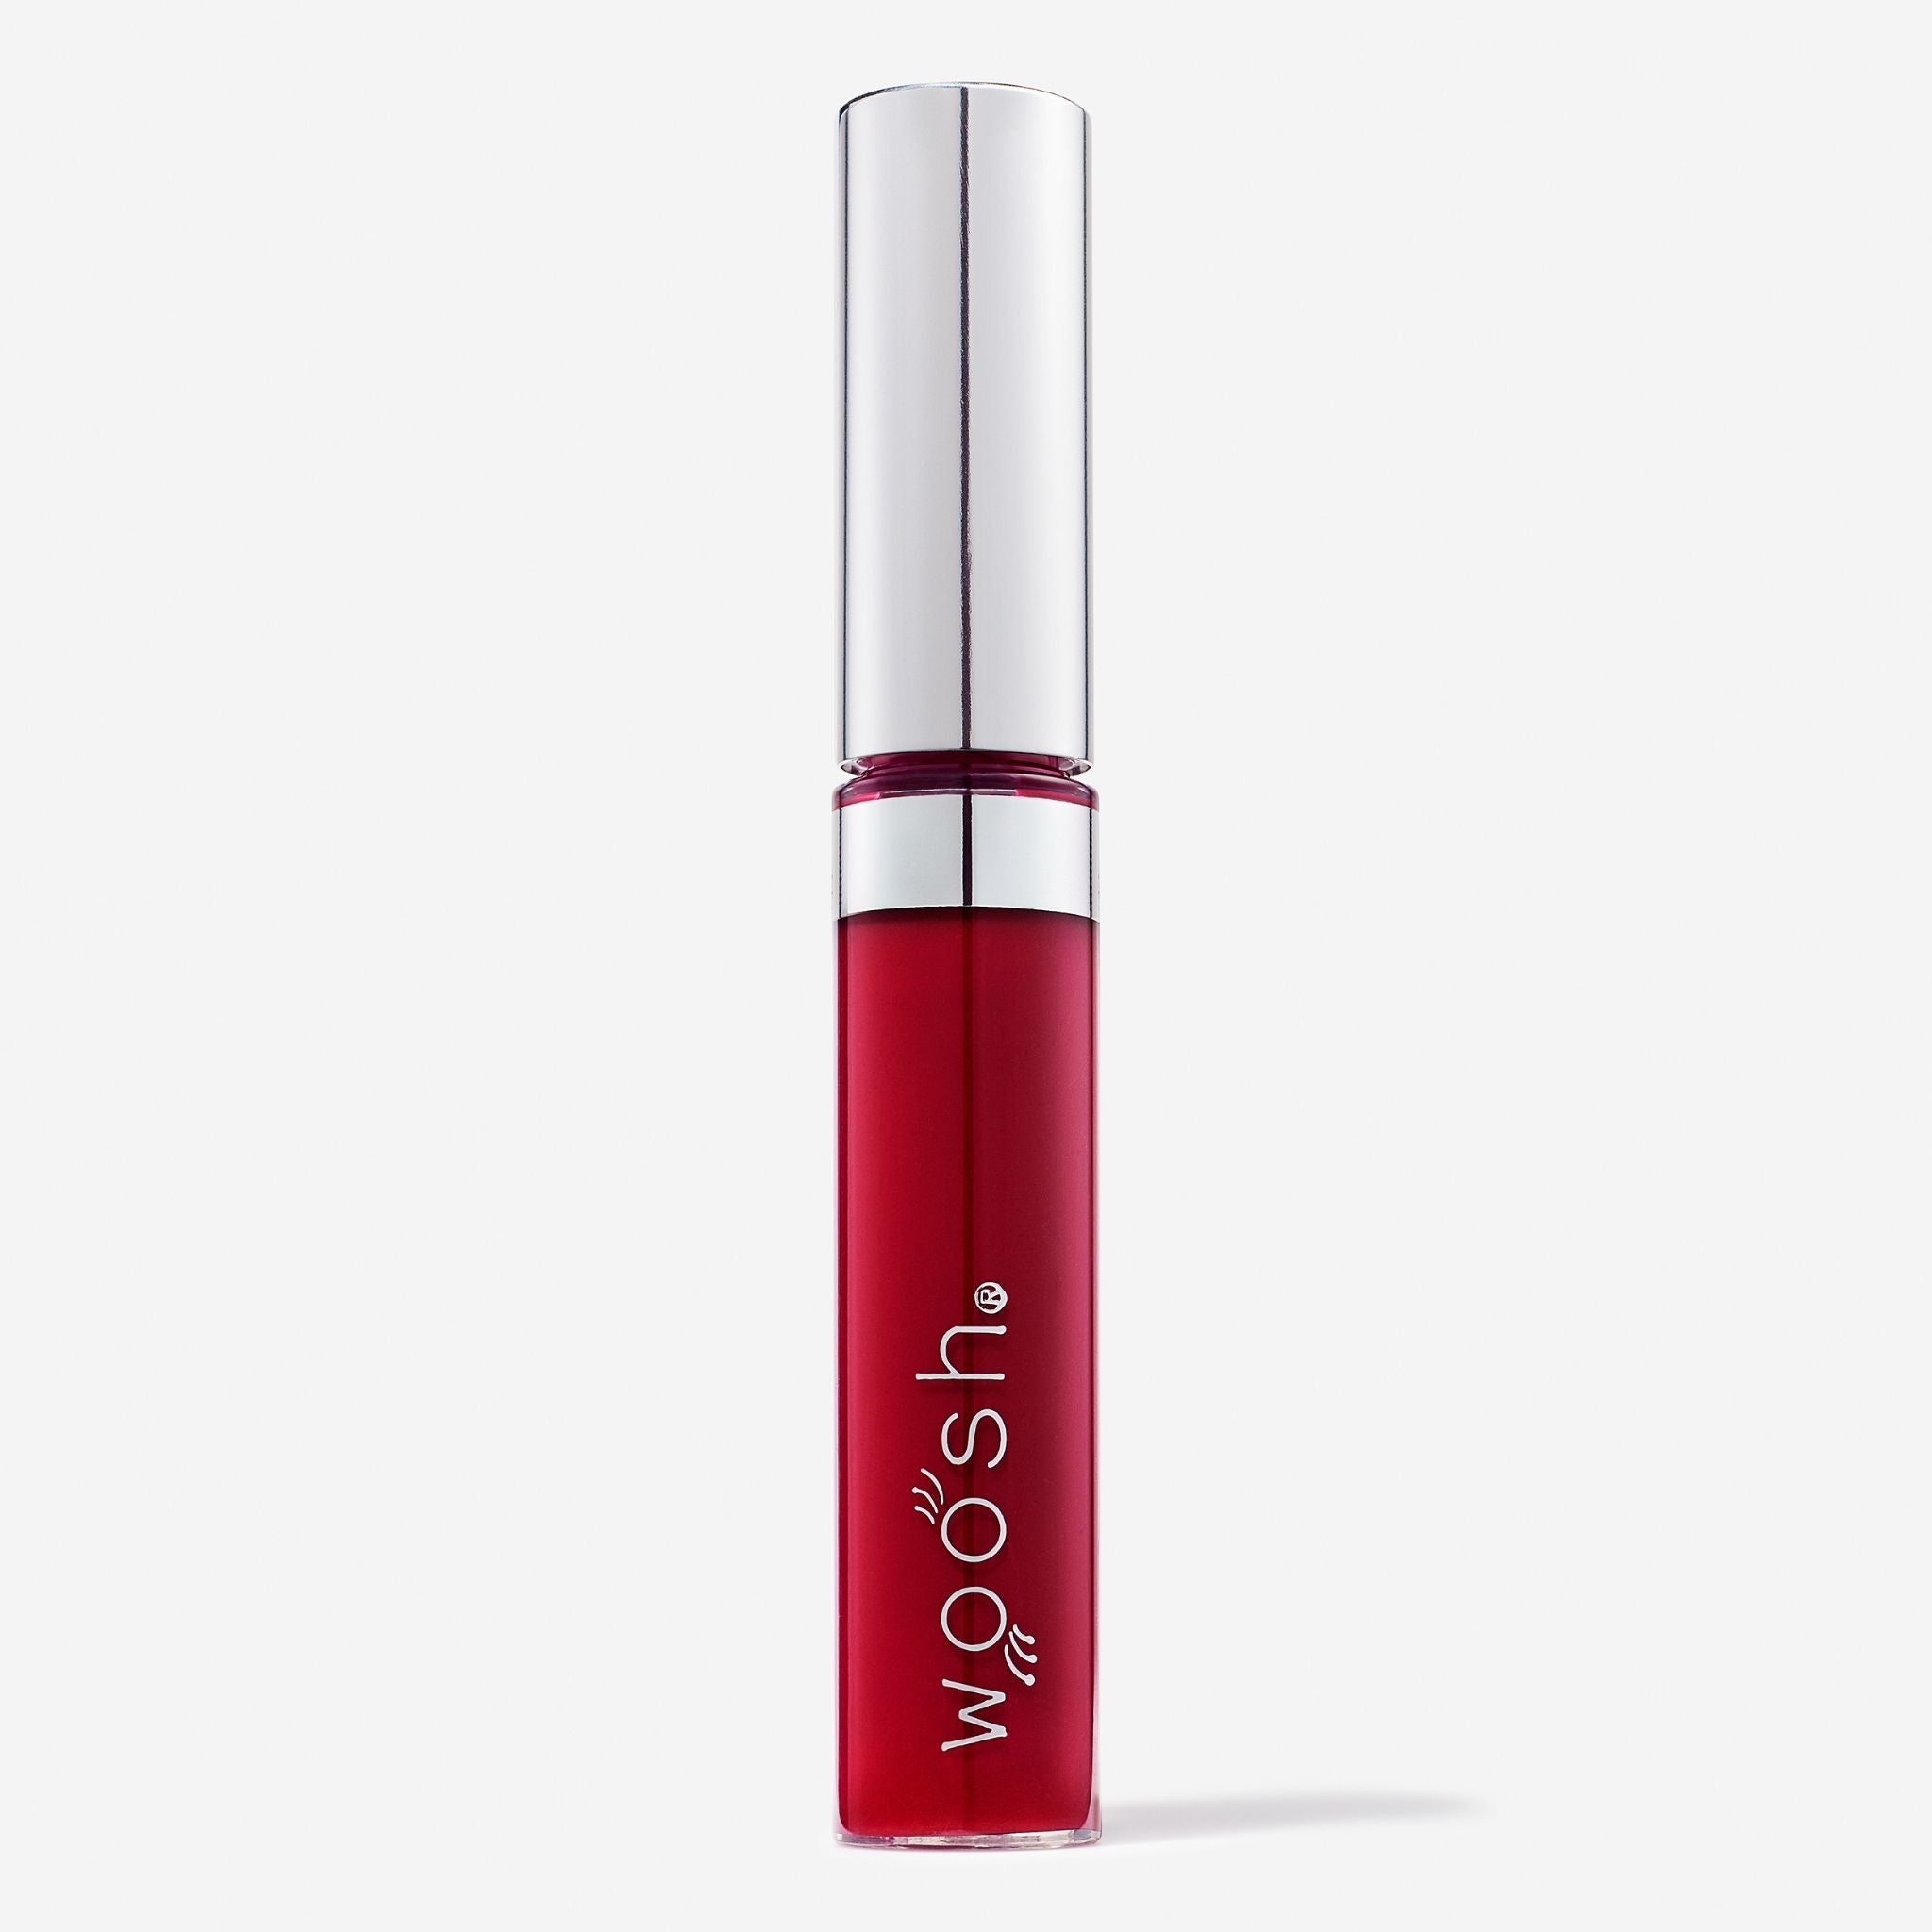  New shade whisper is a purple berry shade infused with shea butter and hyaluronic acid.